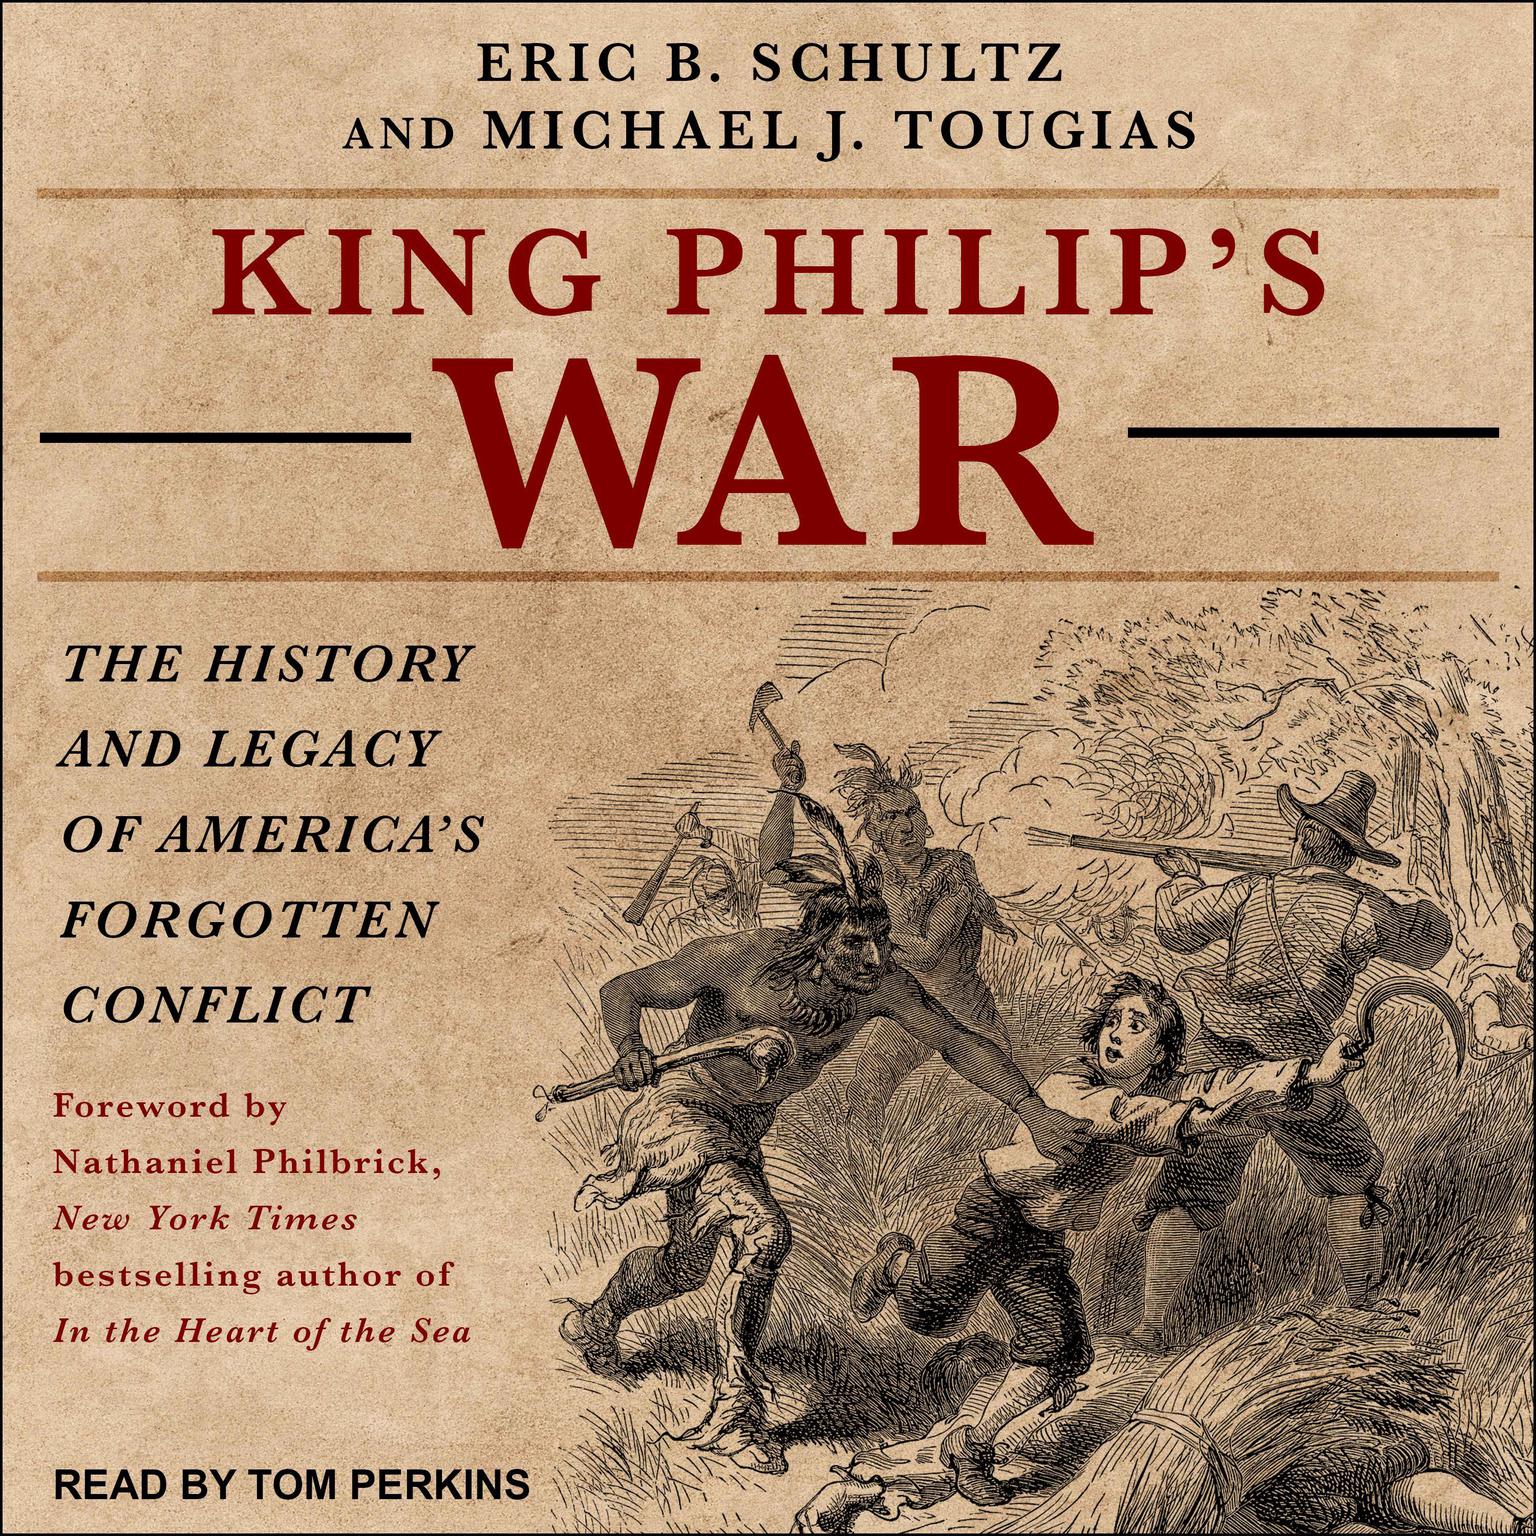 King Philips War: The History and Legacy of Americas Forgotten Conflict Audiobook, by Eric B. Schultz